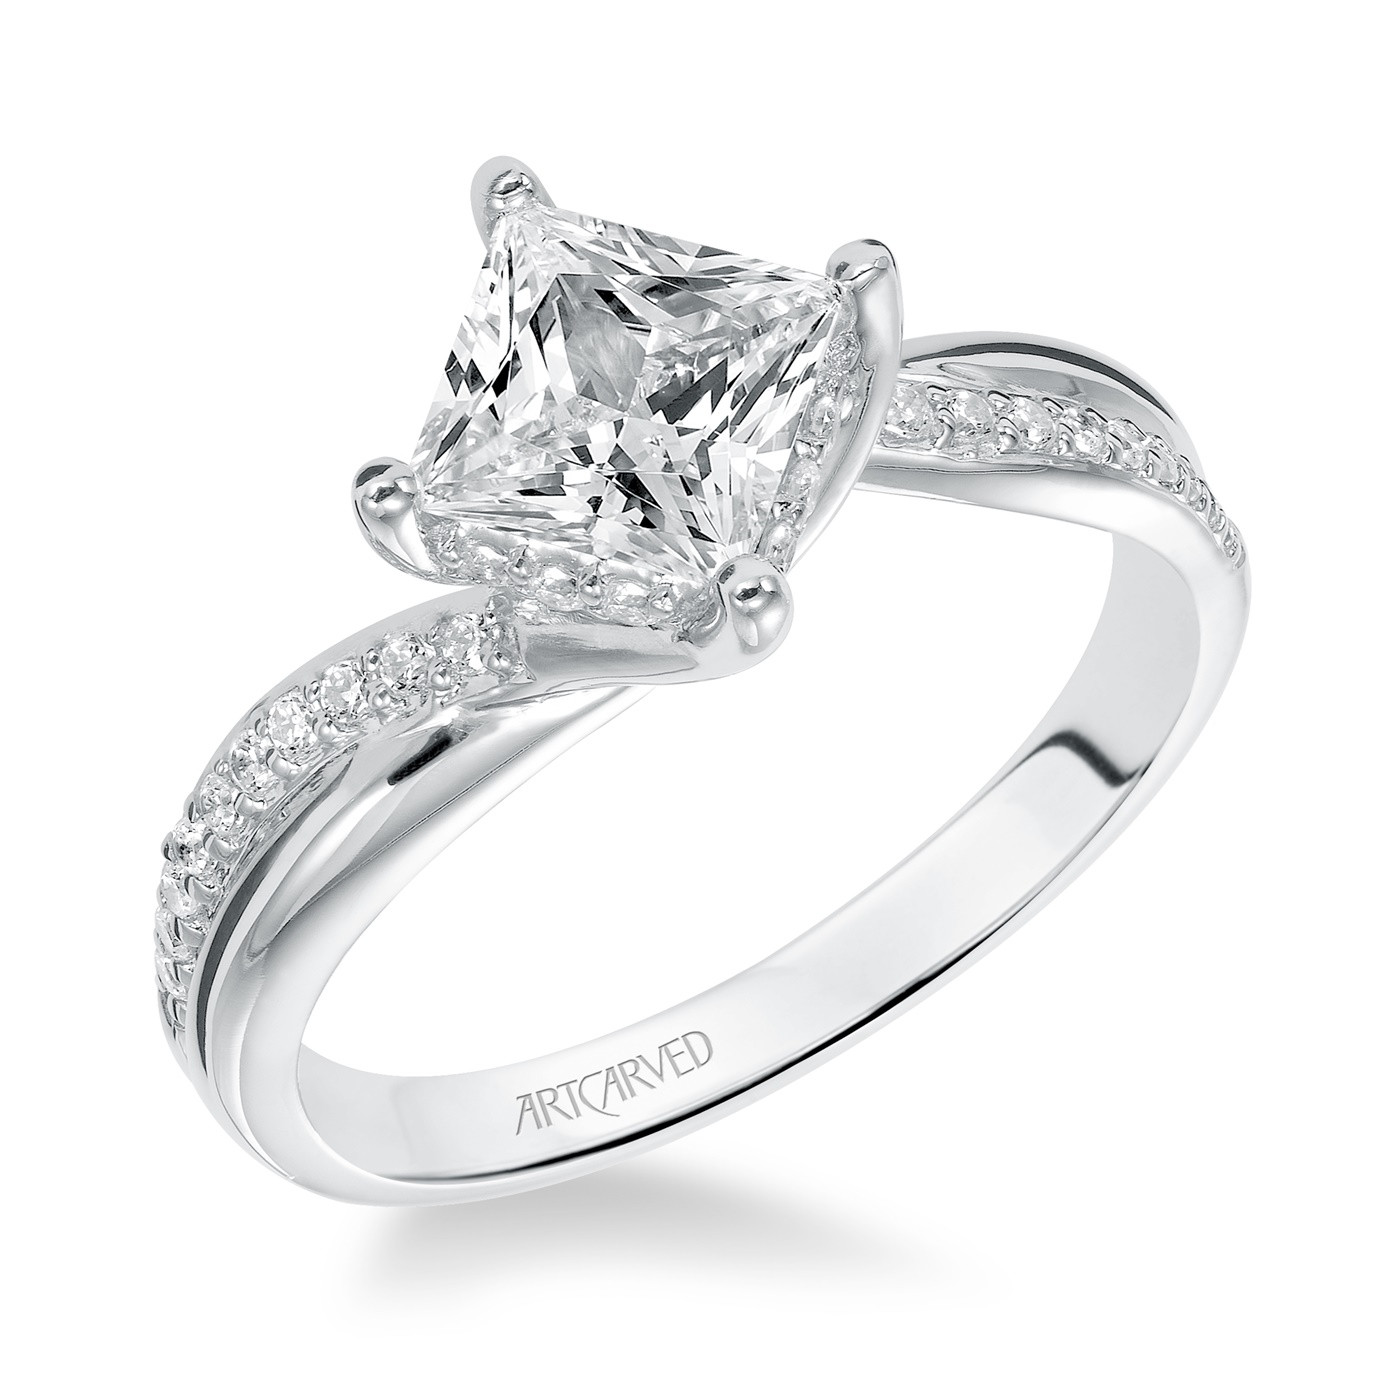 Square Wedding Bands
 14kt White Gold and Square Diamond Engagement Ring by